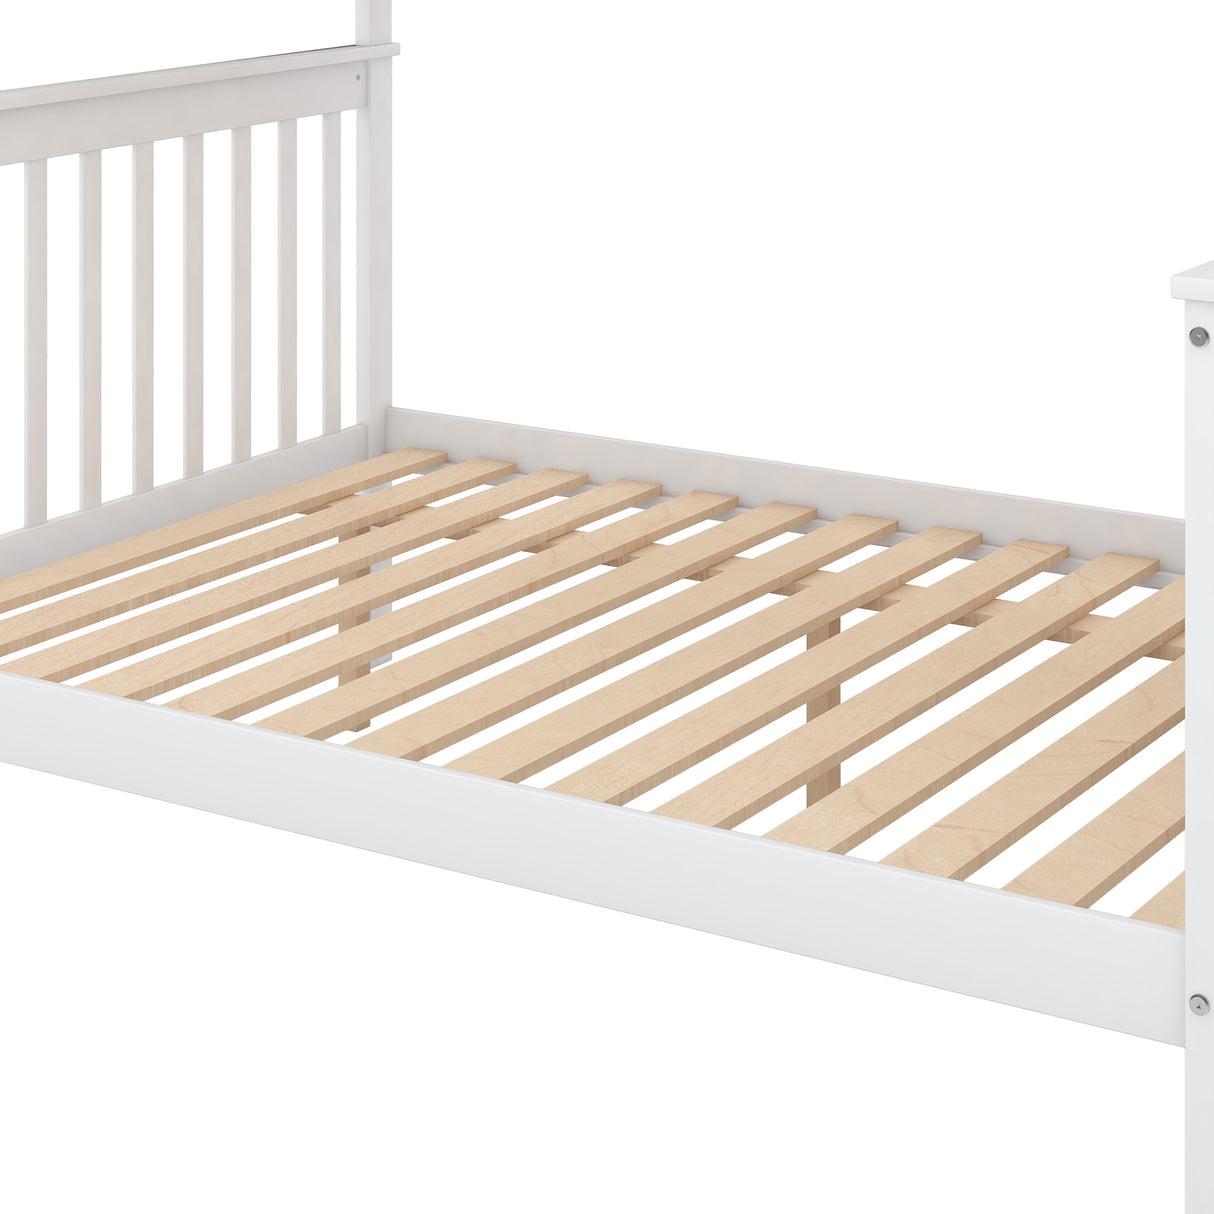 Twin over Full Stairway Bunk Bed with storage, White - Home Elegance USA